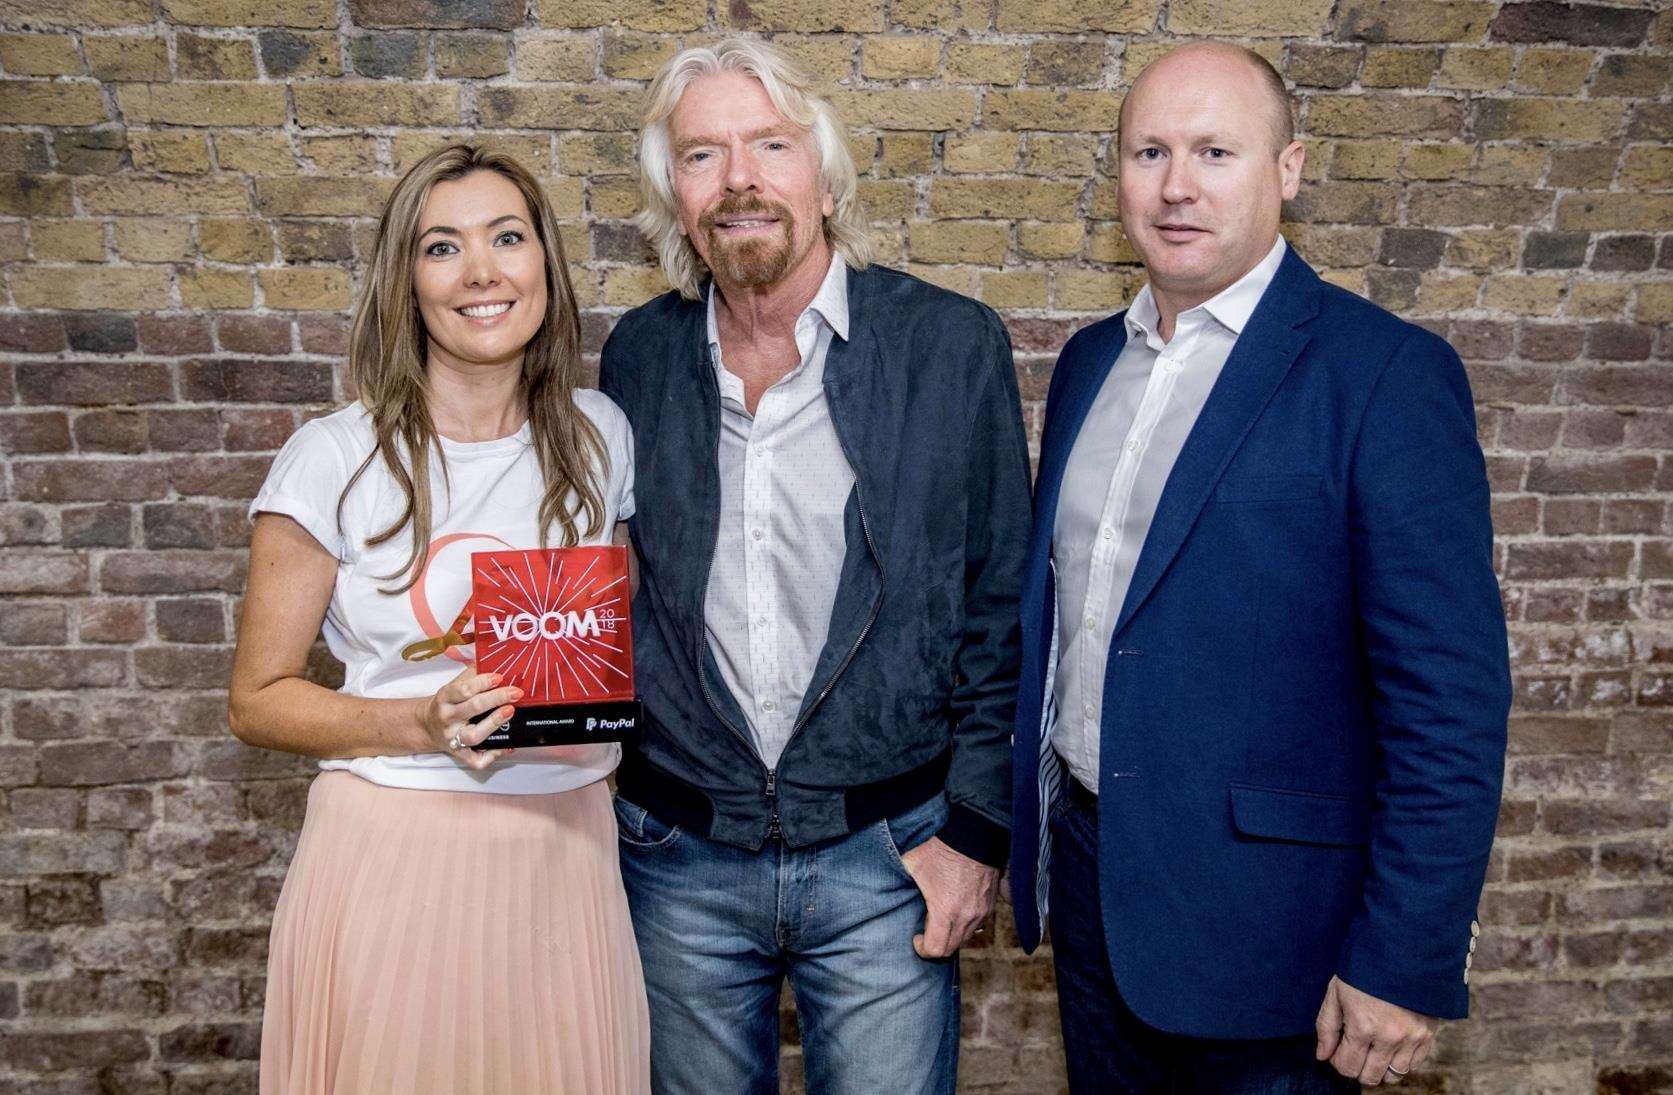 Lauren Hampshire is presented with her award by Virgin boss Richard Branson and PayPal boss Mark Brant (2273884)